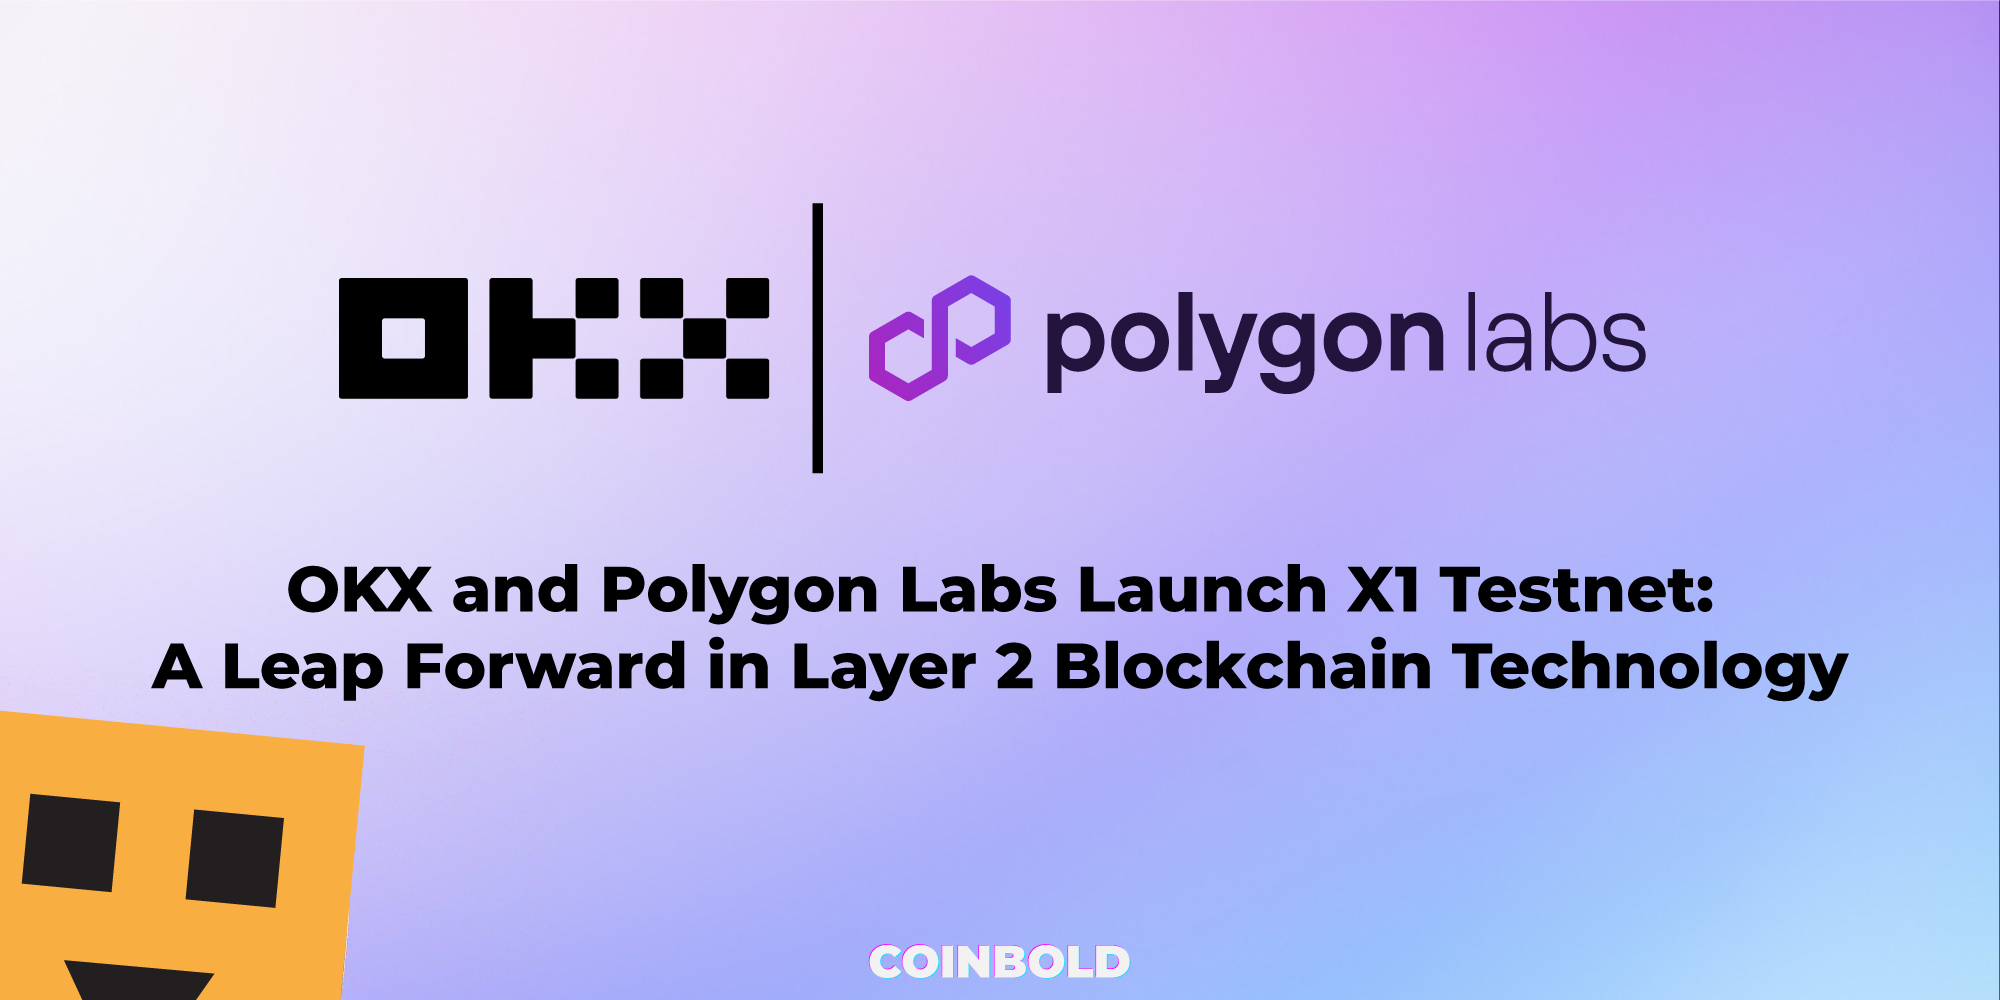 OKX and Polygon Labs Launch X1 Testnet A Leap Forward in Layer 2 Blockchain Technology